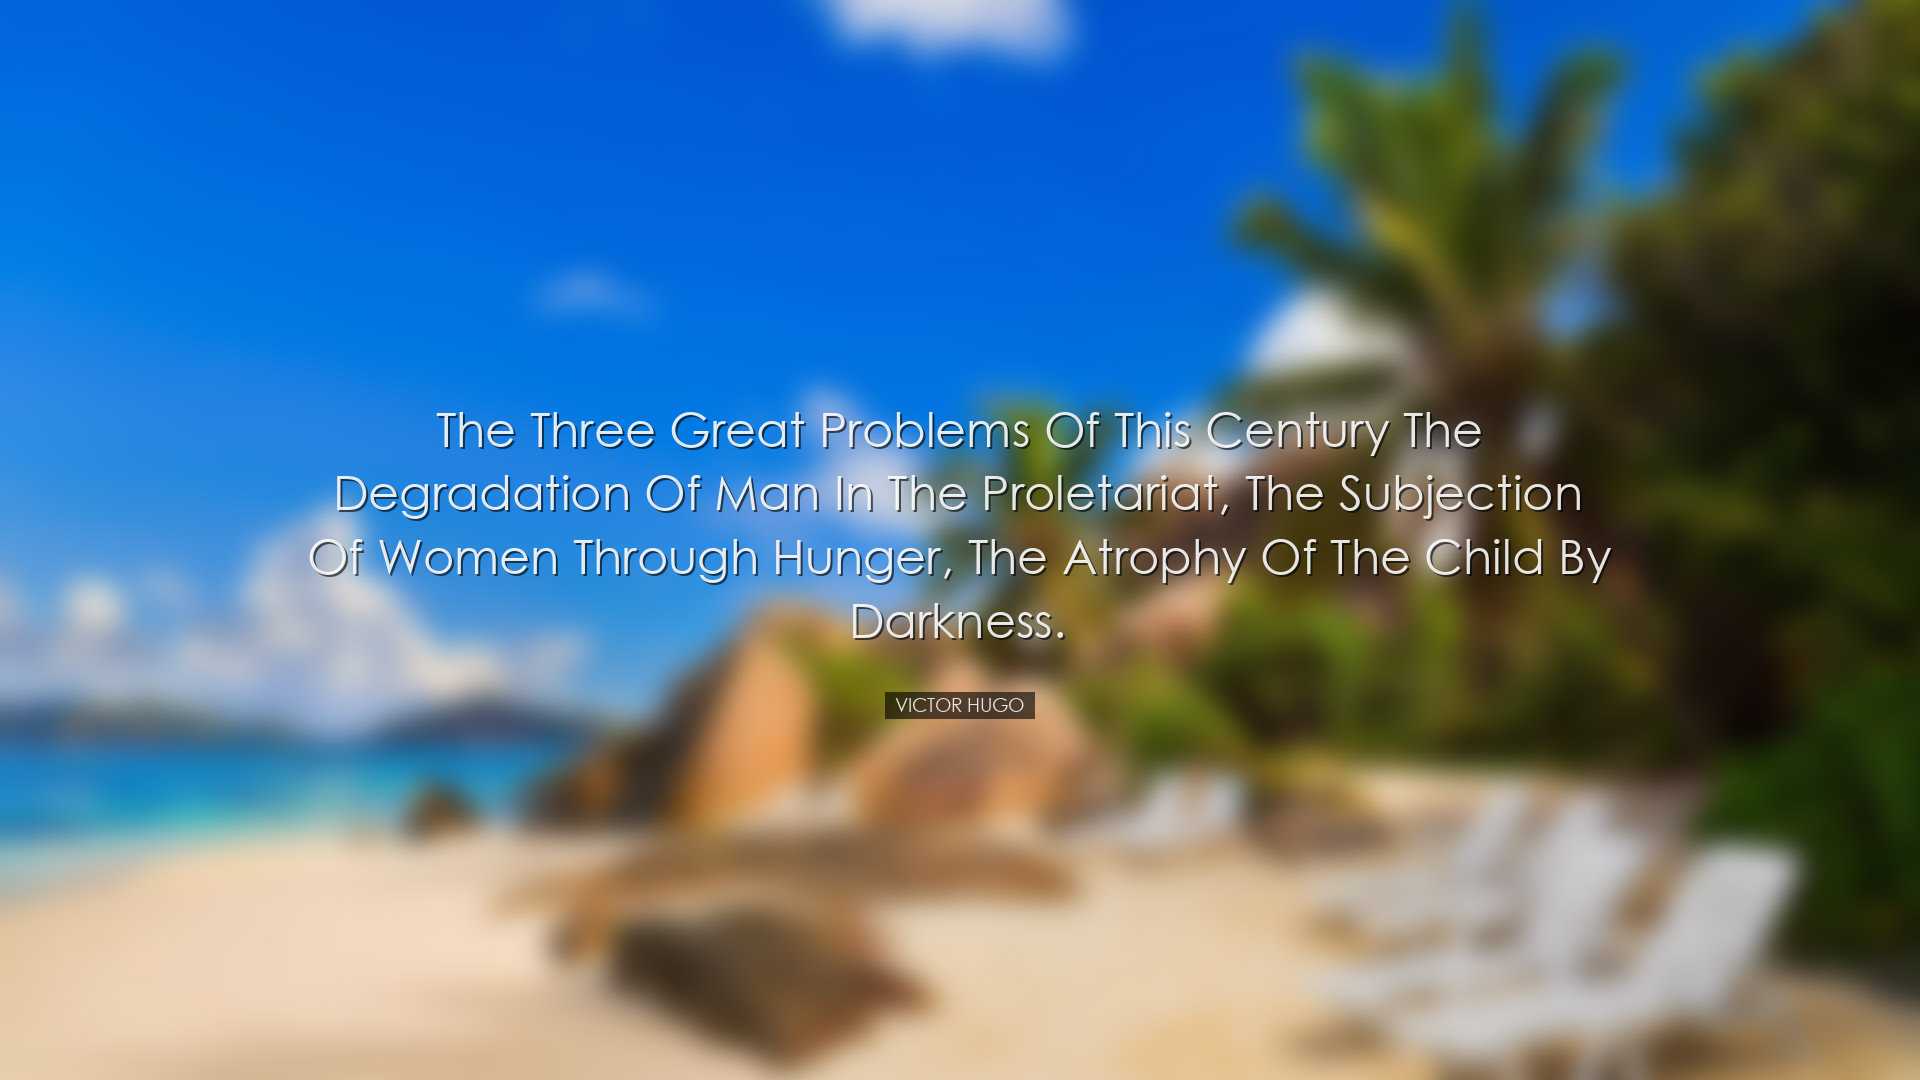 The three great problems of this century the degradation of man in